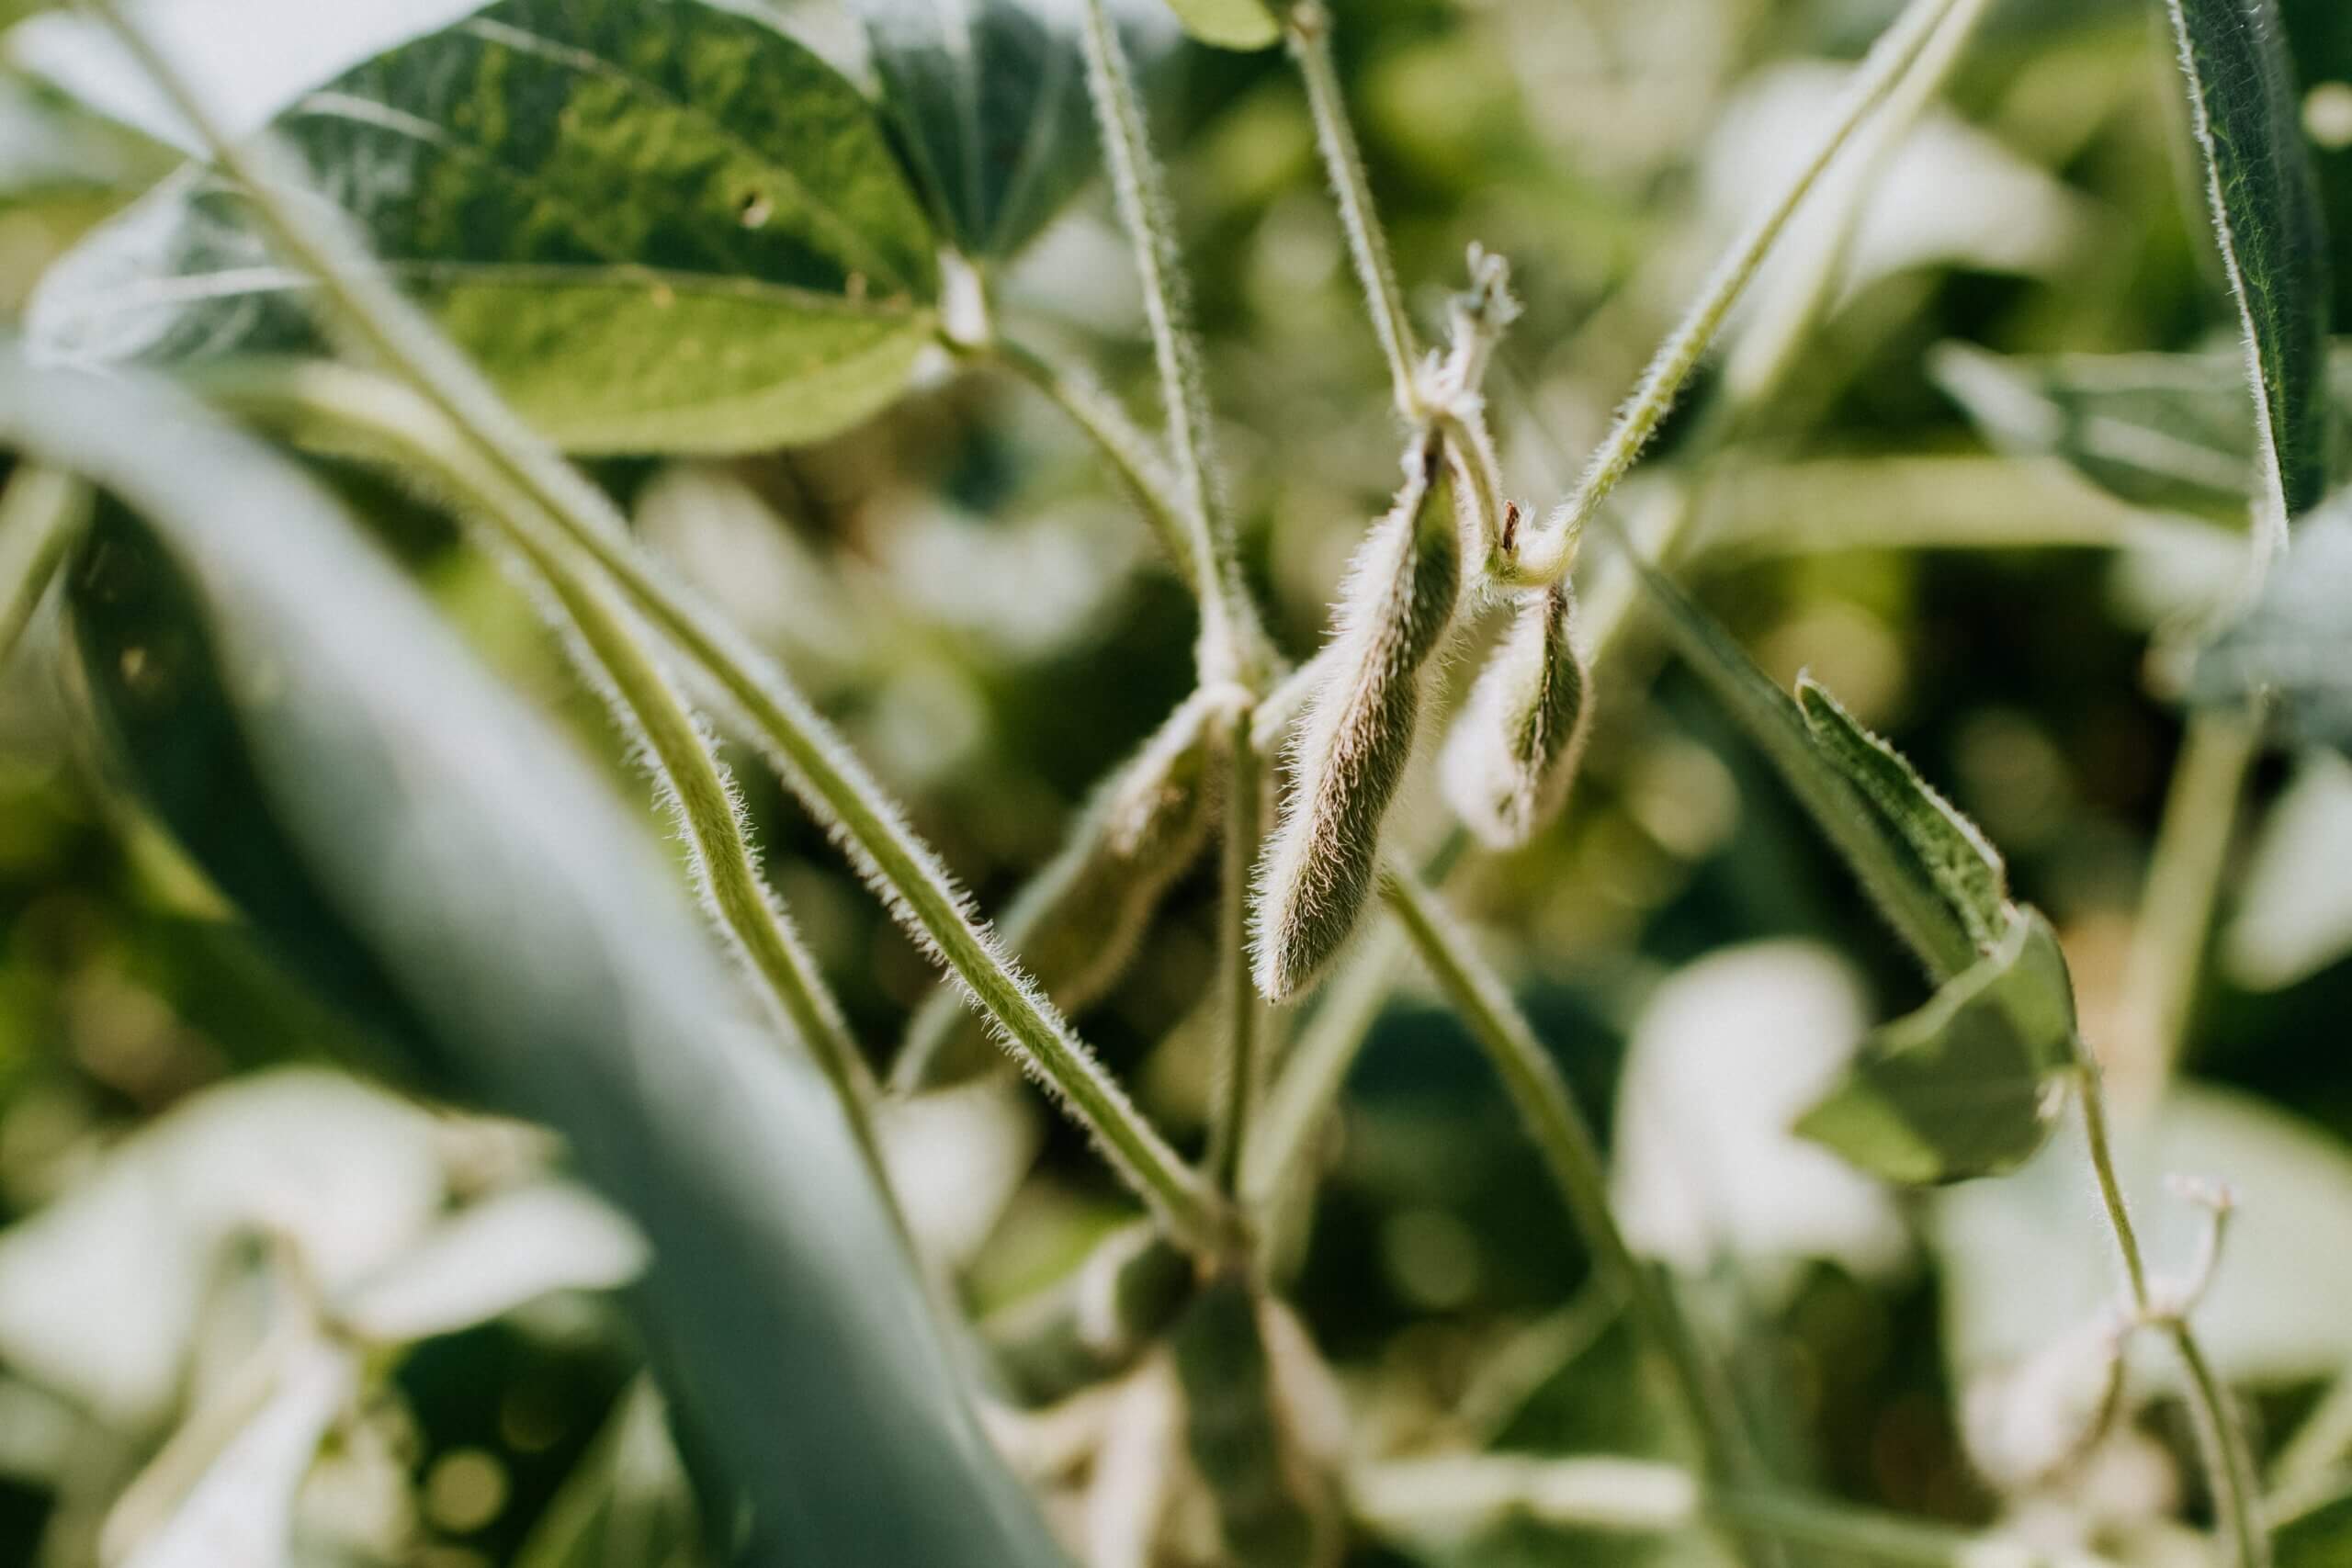 Researchers from Slovakia planted soybeans near Chernobyl - and found that they were able to get used to the hostile environment and survive. Photo by Kelly Sikkema on Unsplash